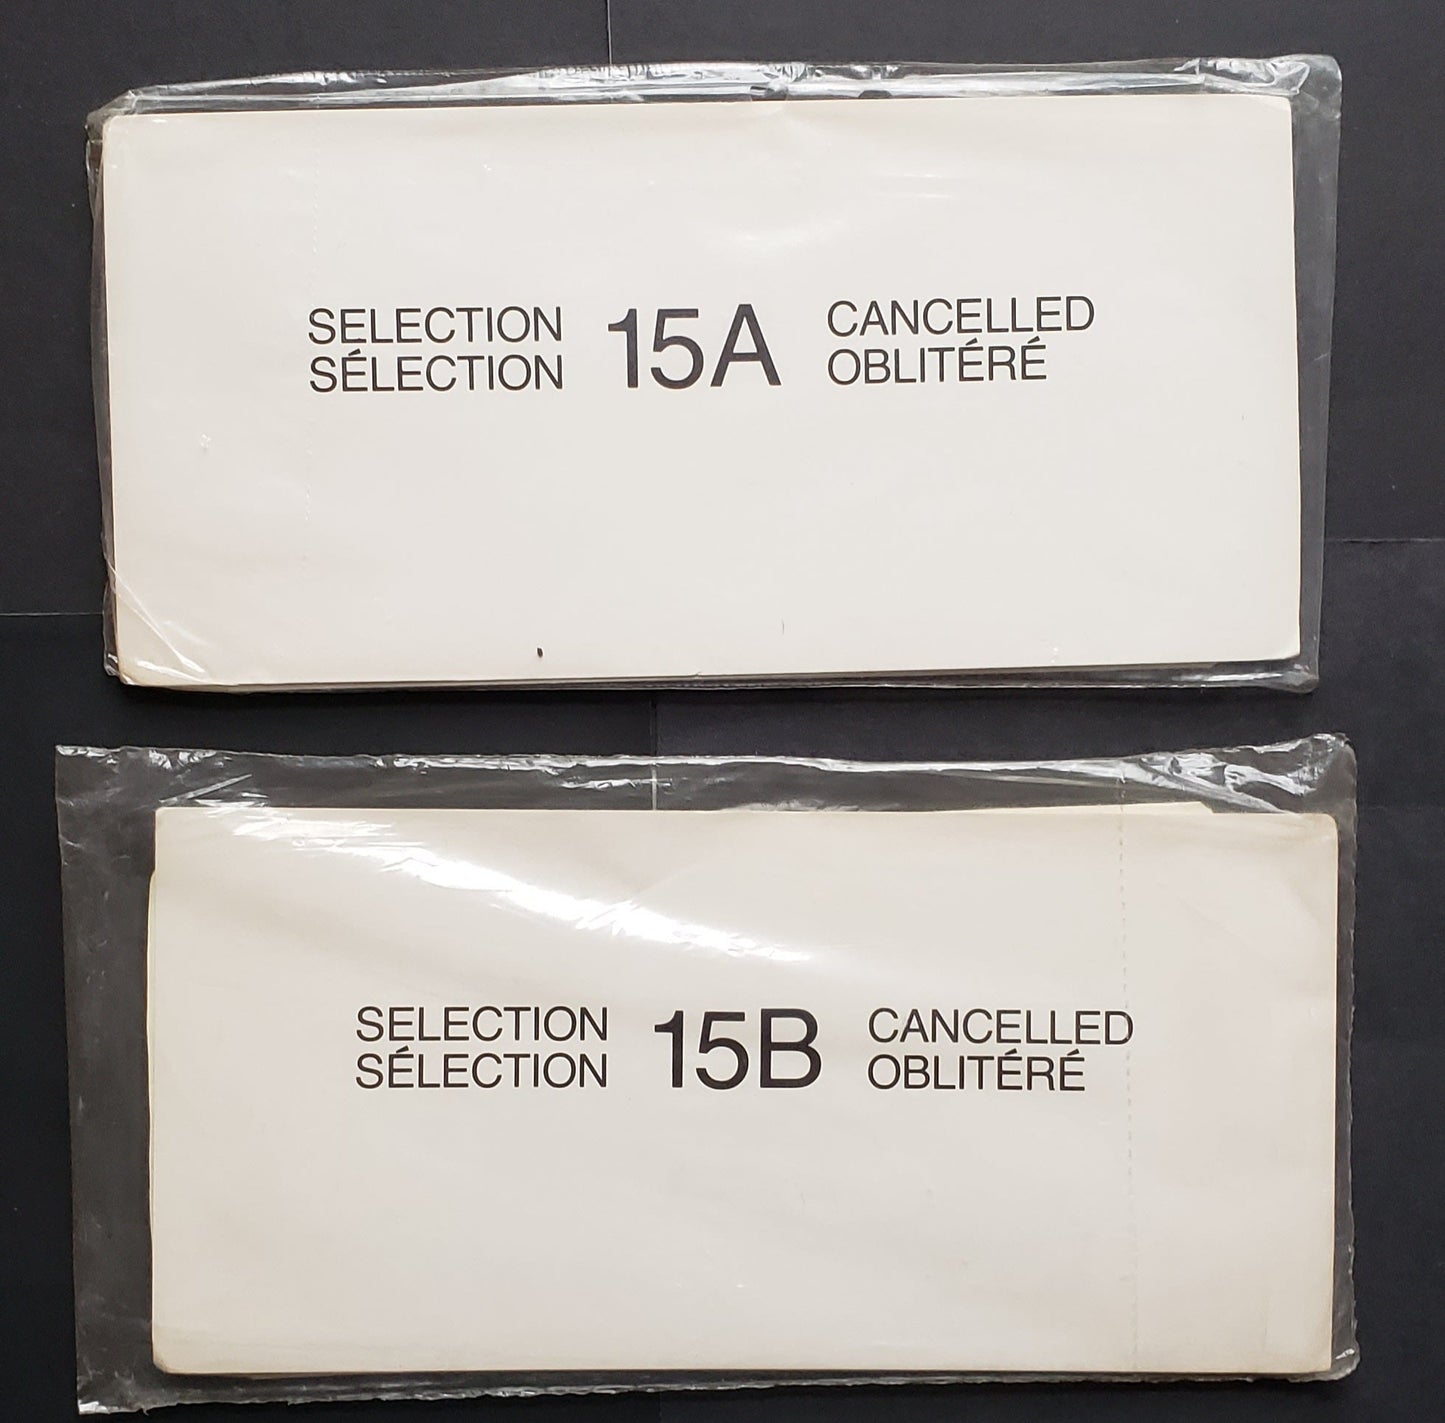 Two Sealed Packs Containing Floral Aerogrammes From Series A and B With October 17, 1973 First Day Cancels